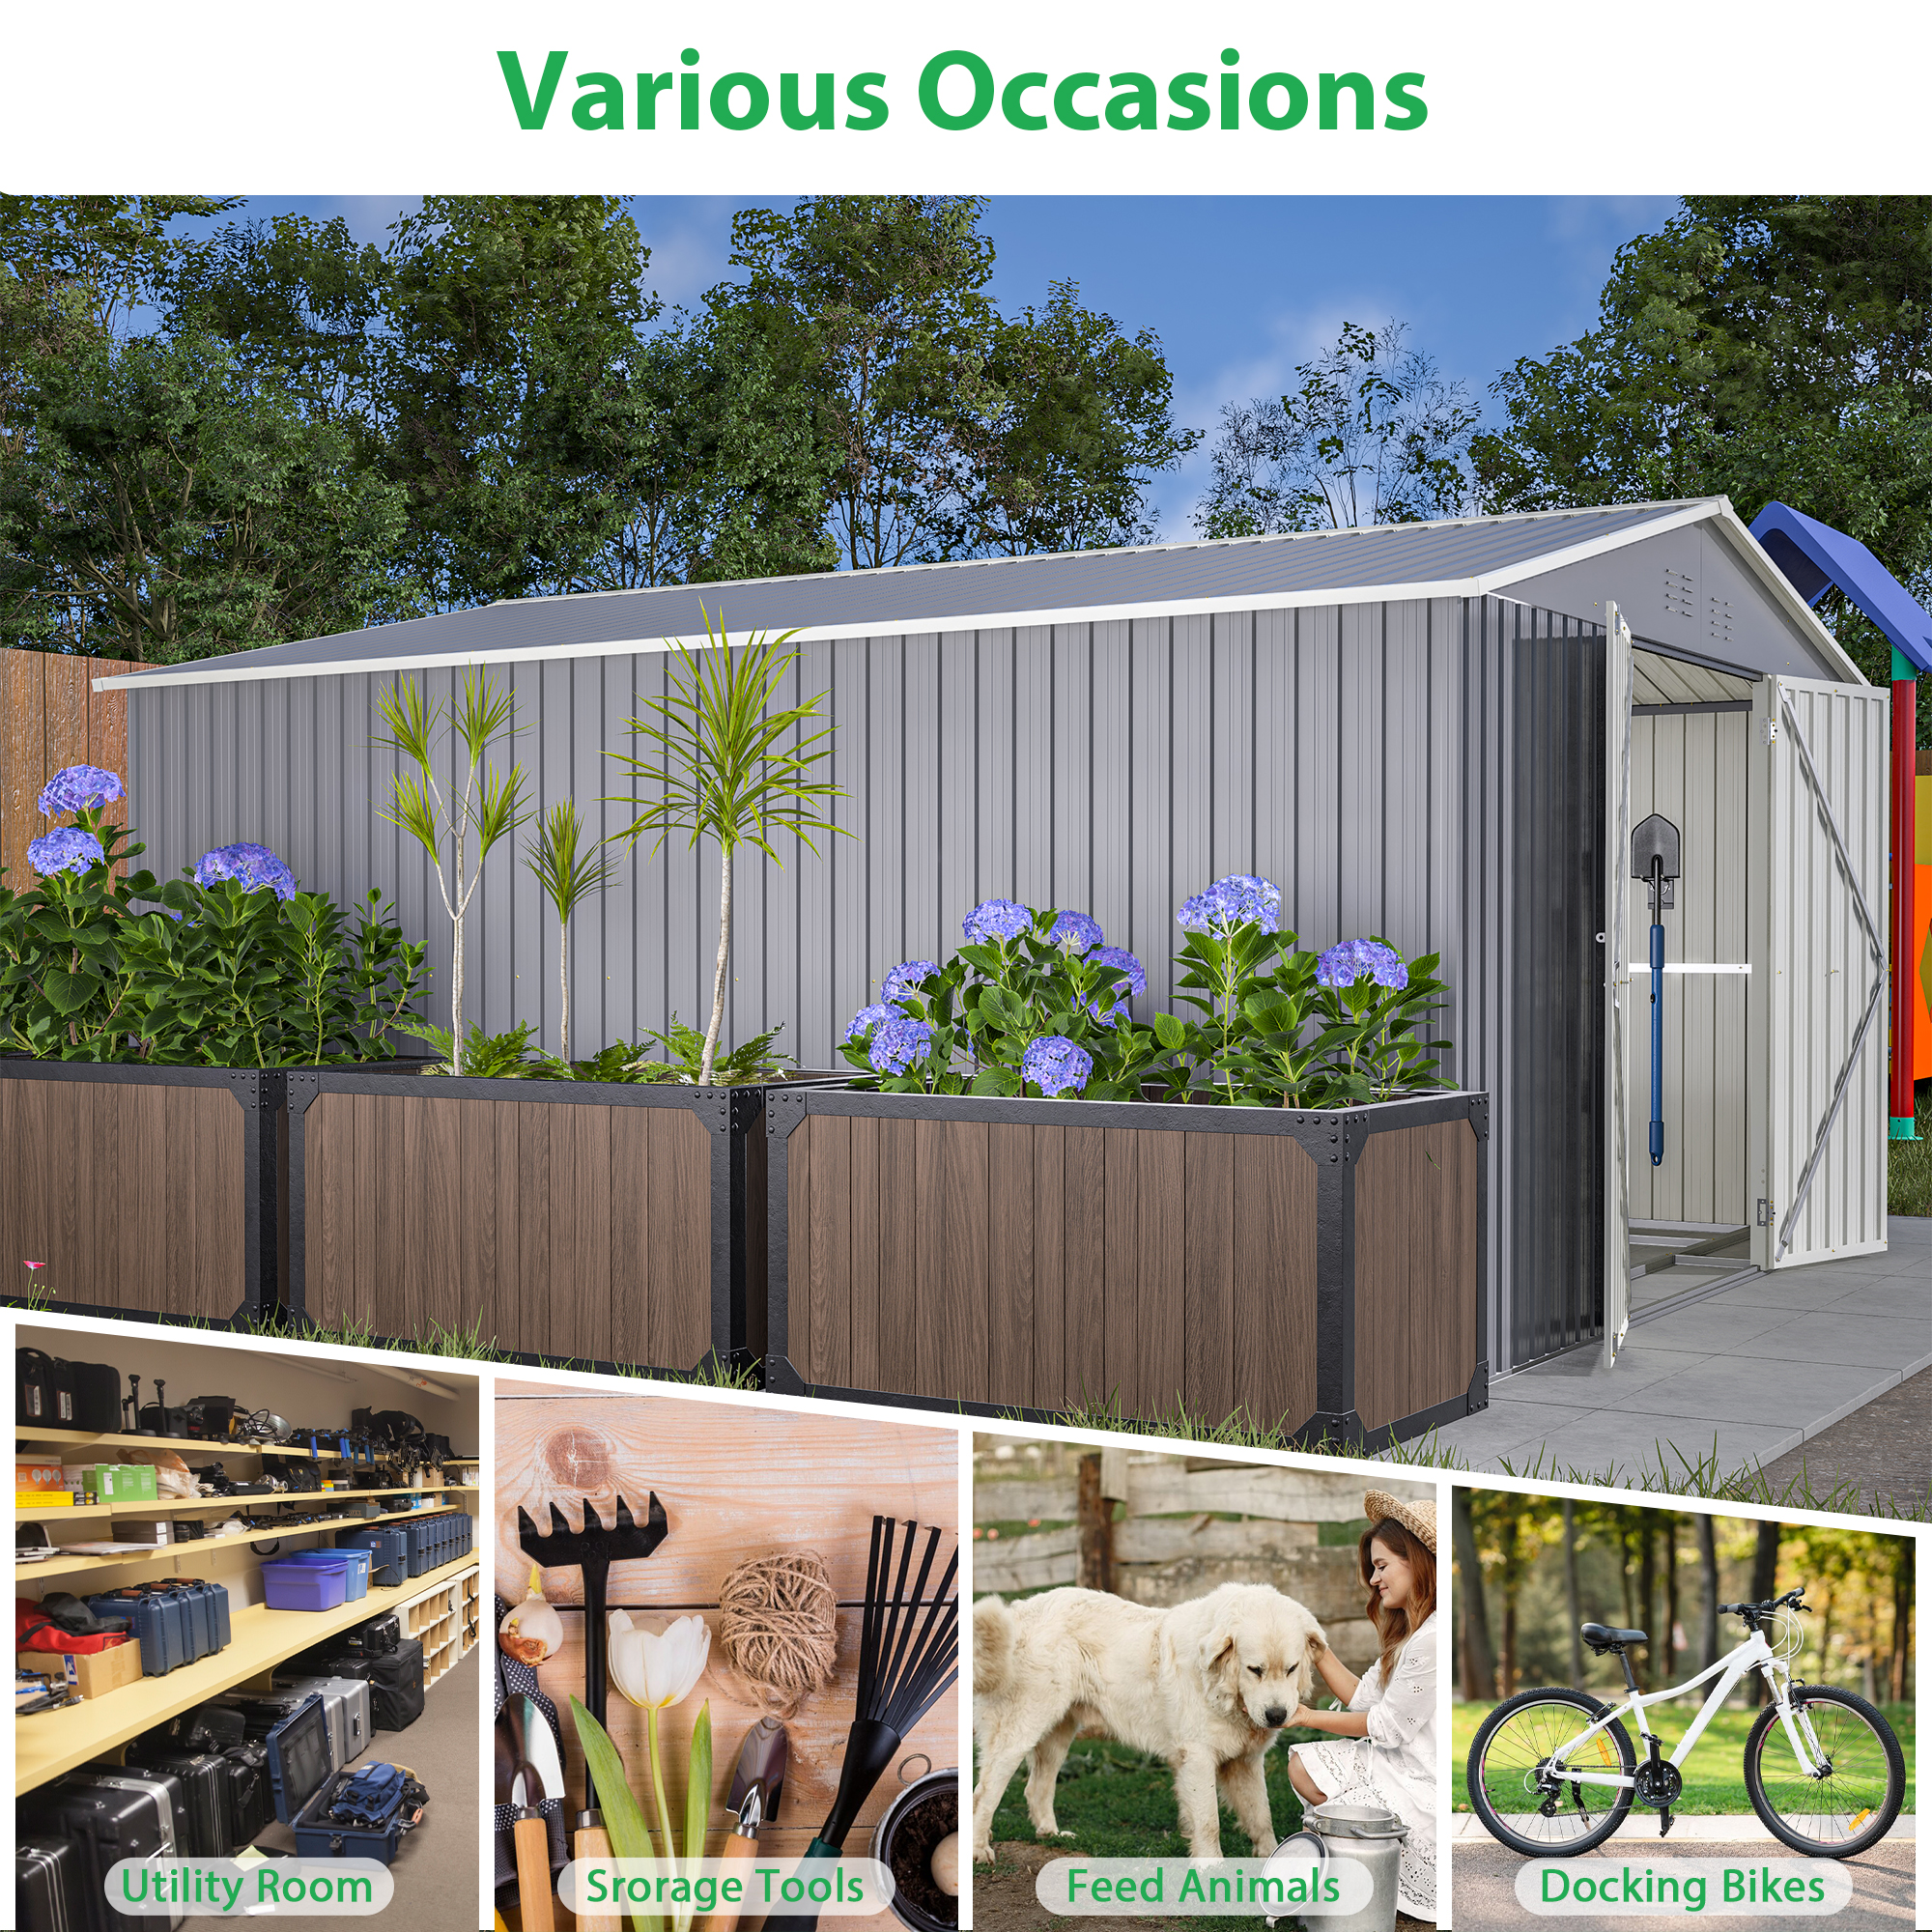 LZBEITEM 11 x 13 ft. Outdoor Metal Storage Shed with Floor Frame Kit, Galvanized Steel Garden Shed, Metal Garden Tool Shed with Lockable for Backyard Patio, Gray, 133.68 x 161.4 x 80.76 in，140.5 sq ft - image 2 of 13